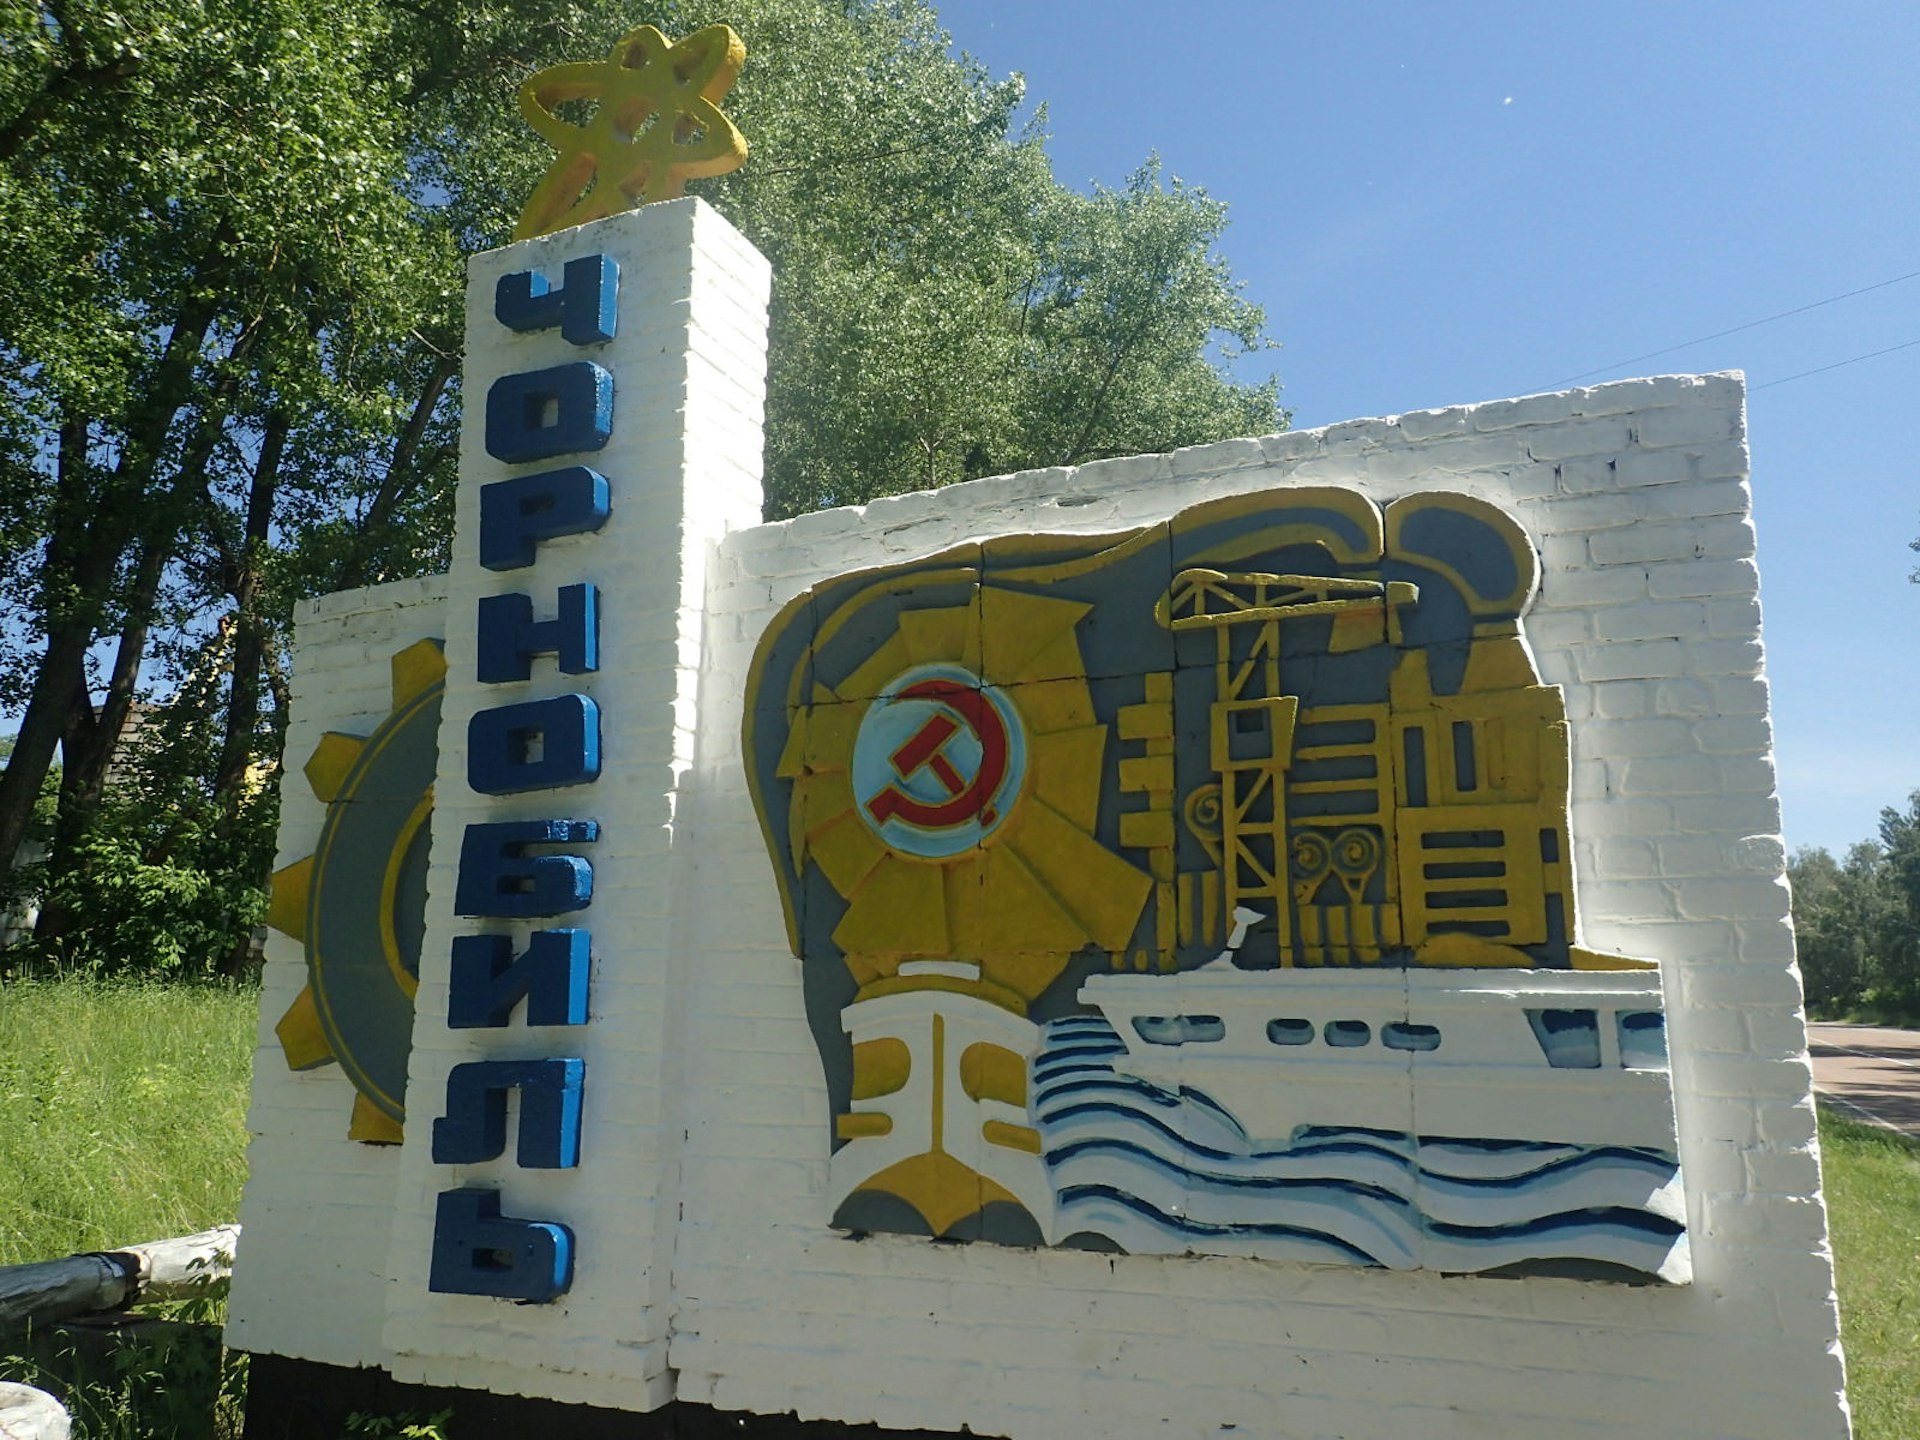 Soviet-era sign outside Chernobyl, with a depiction of the power plant in yellow on a white wall alongside blue script and a red hammer and sickle.